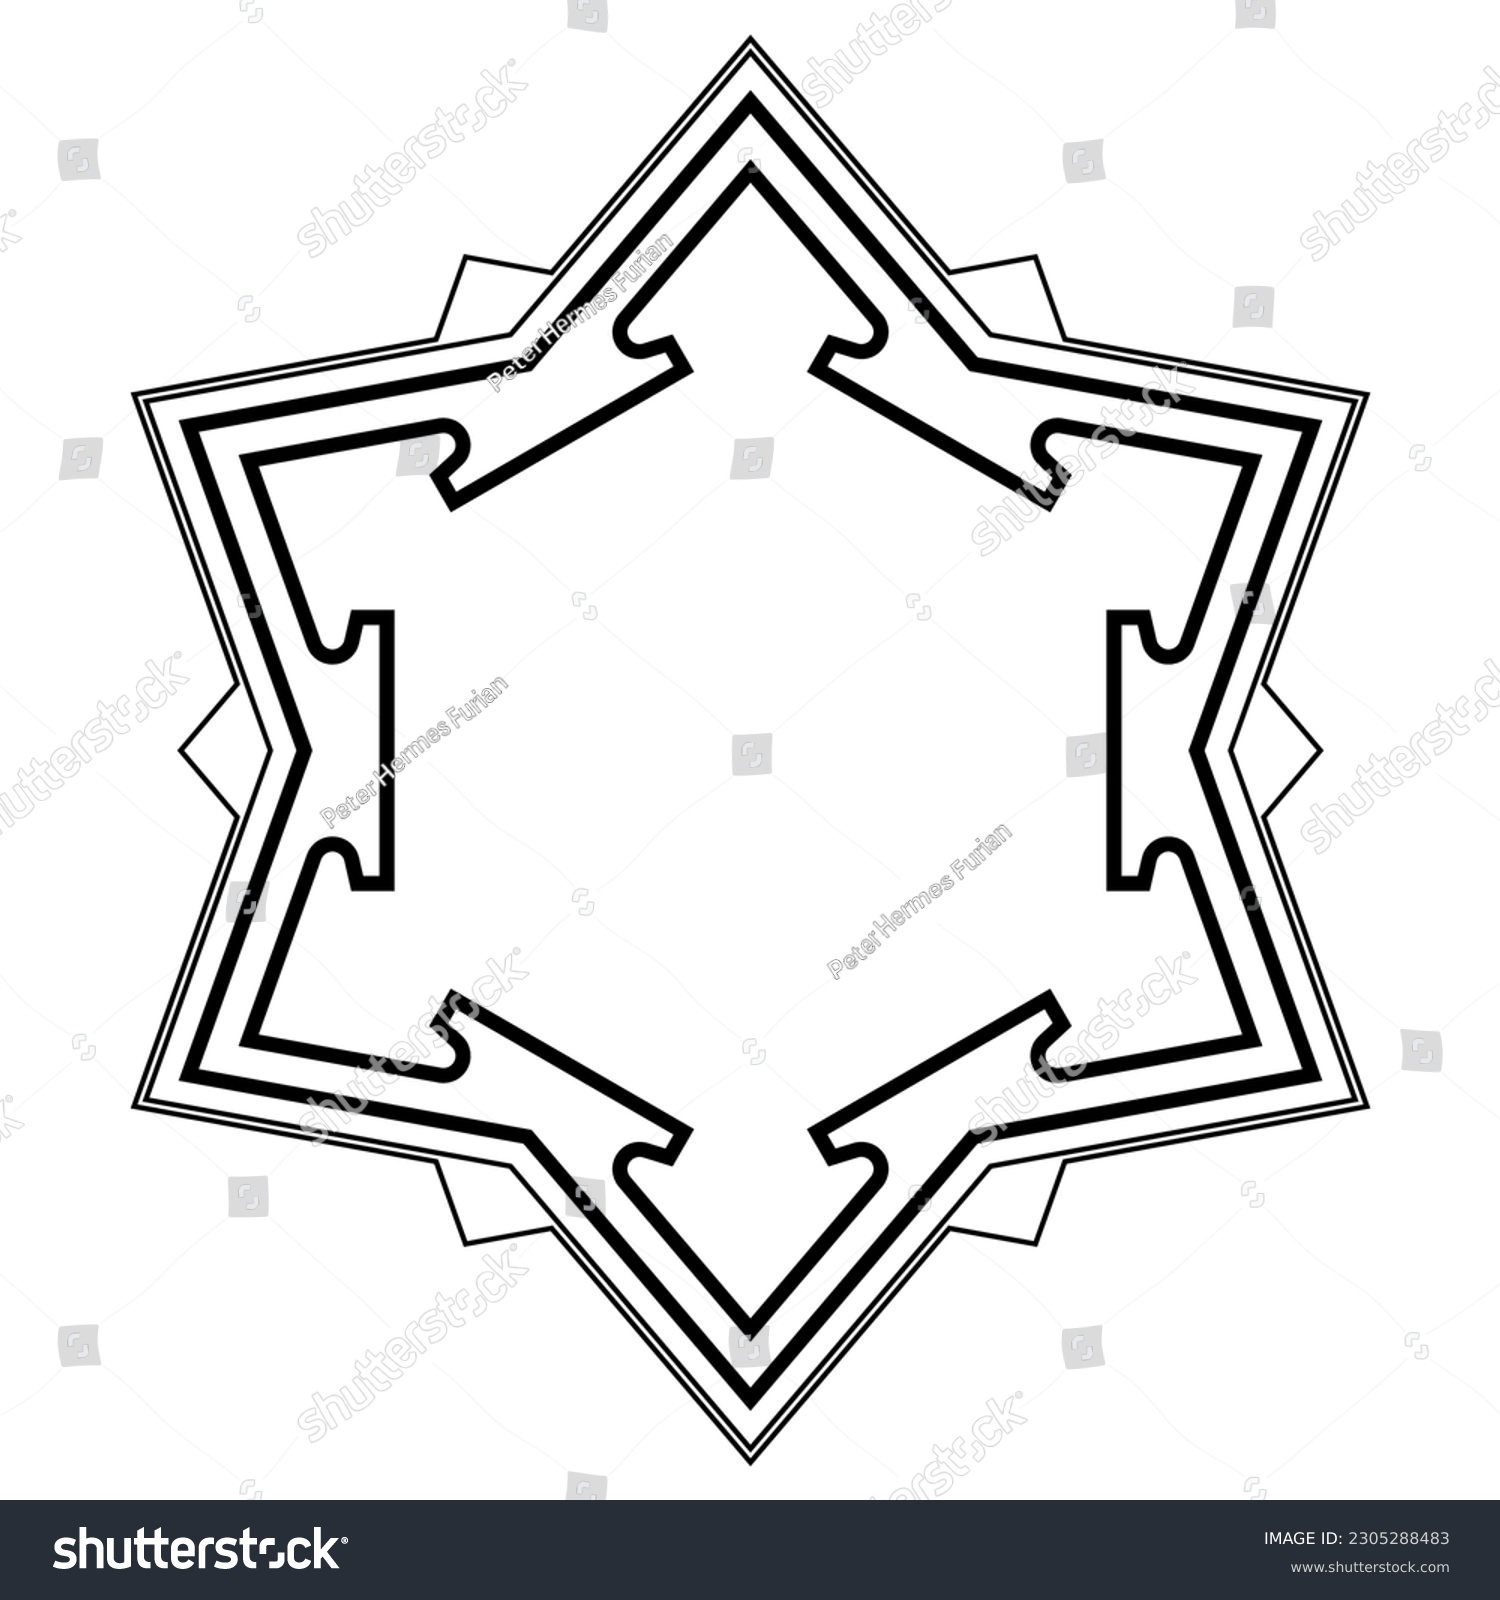 SVG of Hexagonal bastion fort pattern. Plan and basic structure of outer walls of a six pointed star fort, with ravelins, the triangular fortifications and detached outworks, placed opposite a curtain wall. svg